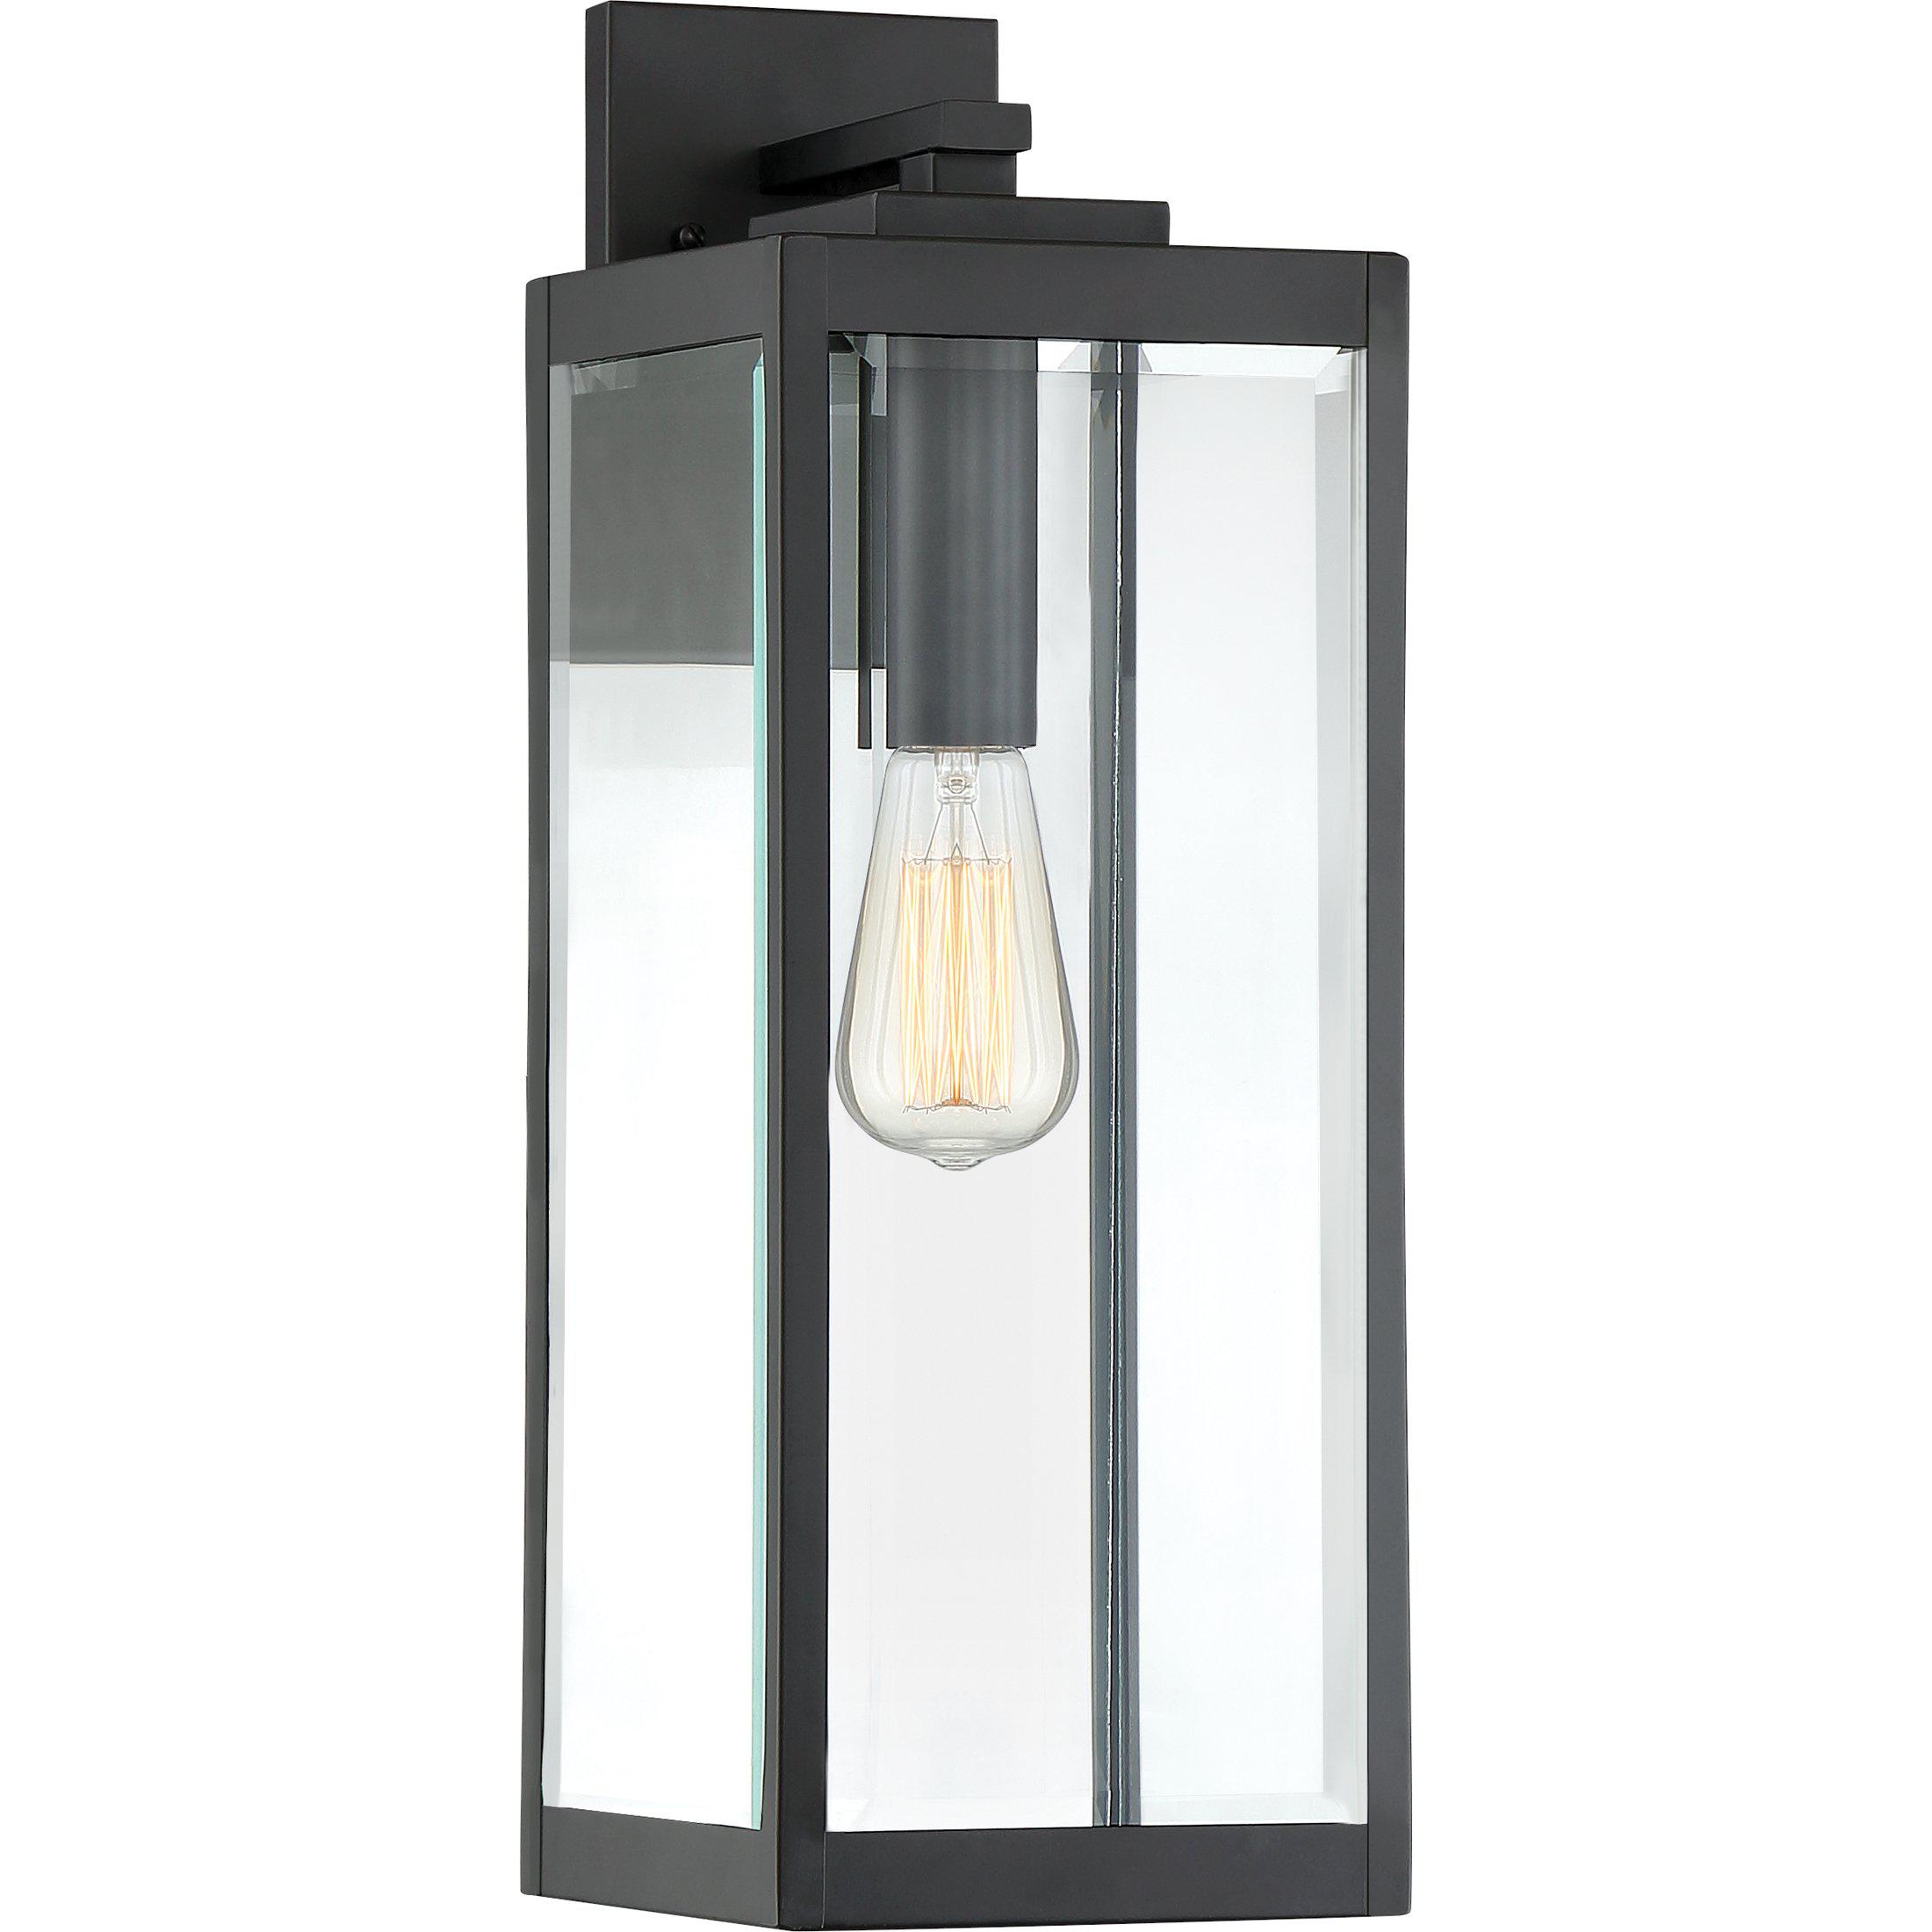 Quoizel  Westover Outdoor Lantern, Large Outdoor l Wall Quoizel Earth Black  